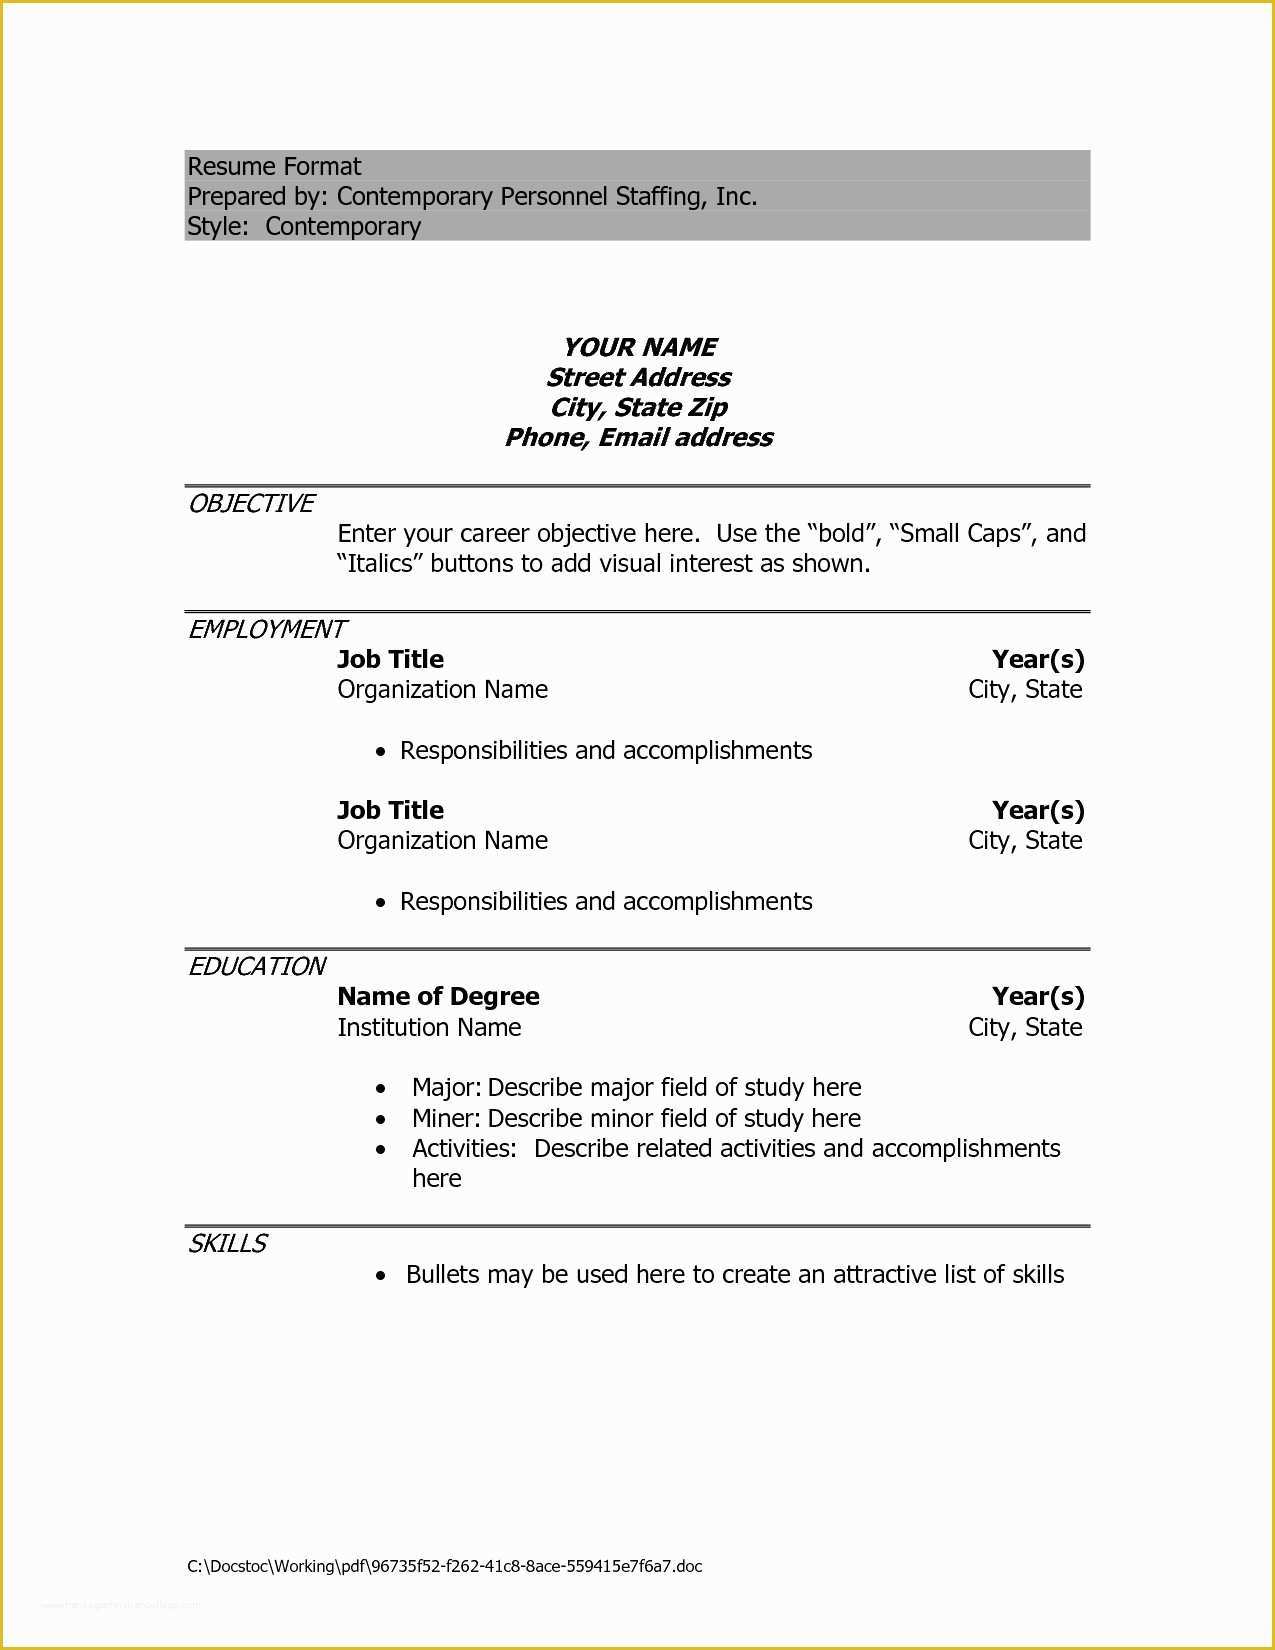 Attractive Resume Templates Free Download Word Of 21 Awesome attractive Resume Templates Free Download